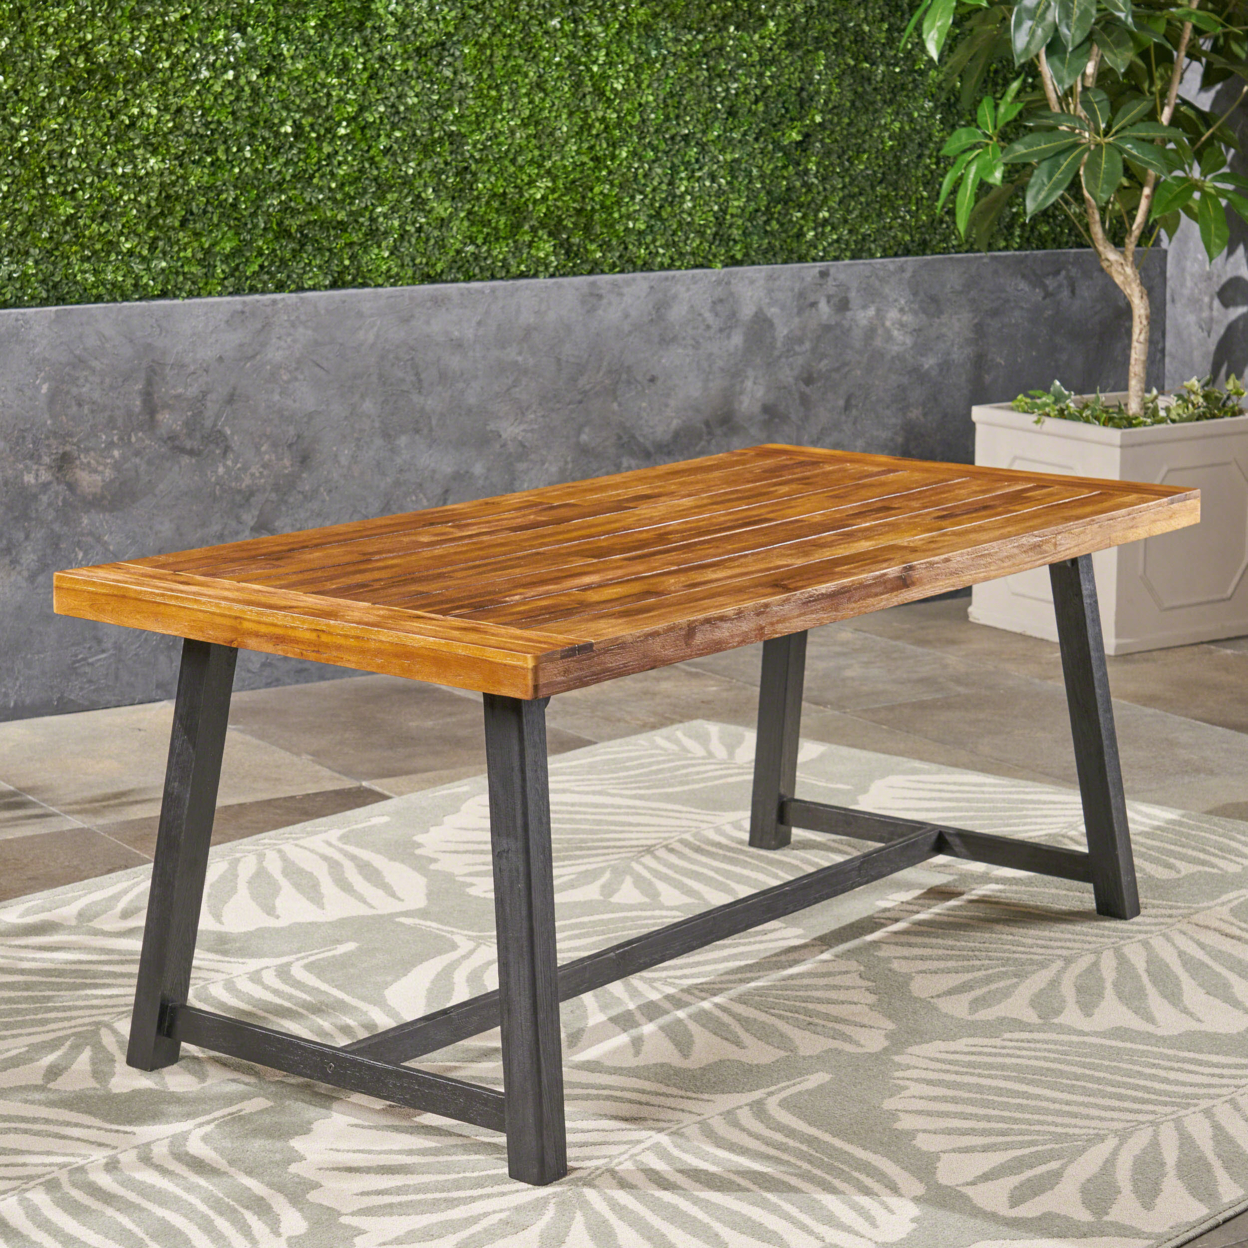 Toby Outdoor Acacia Wood Dining Table - Teak